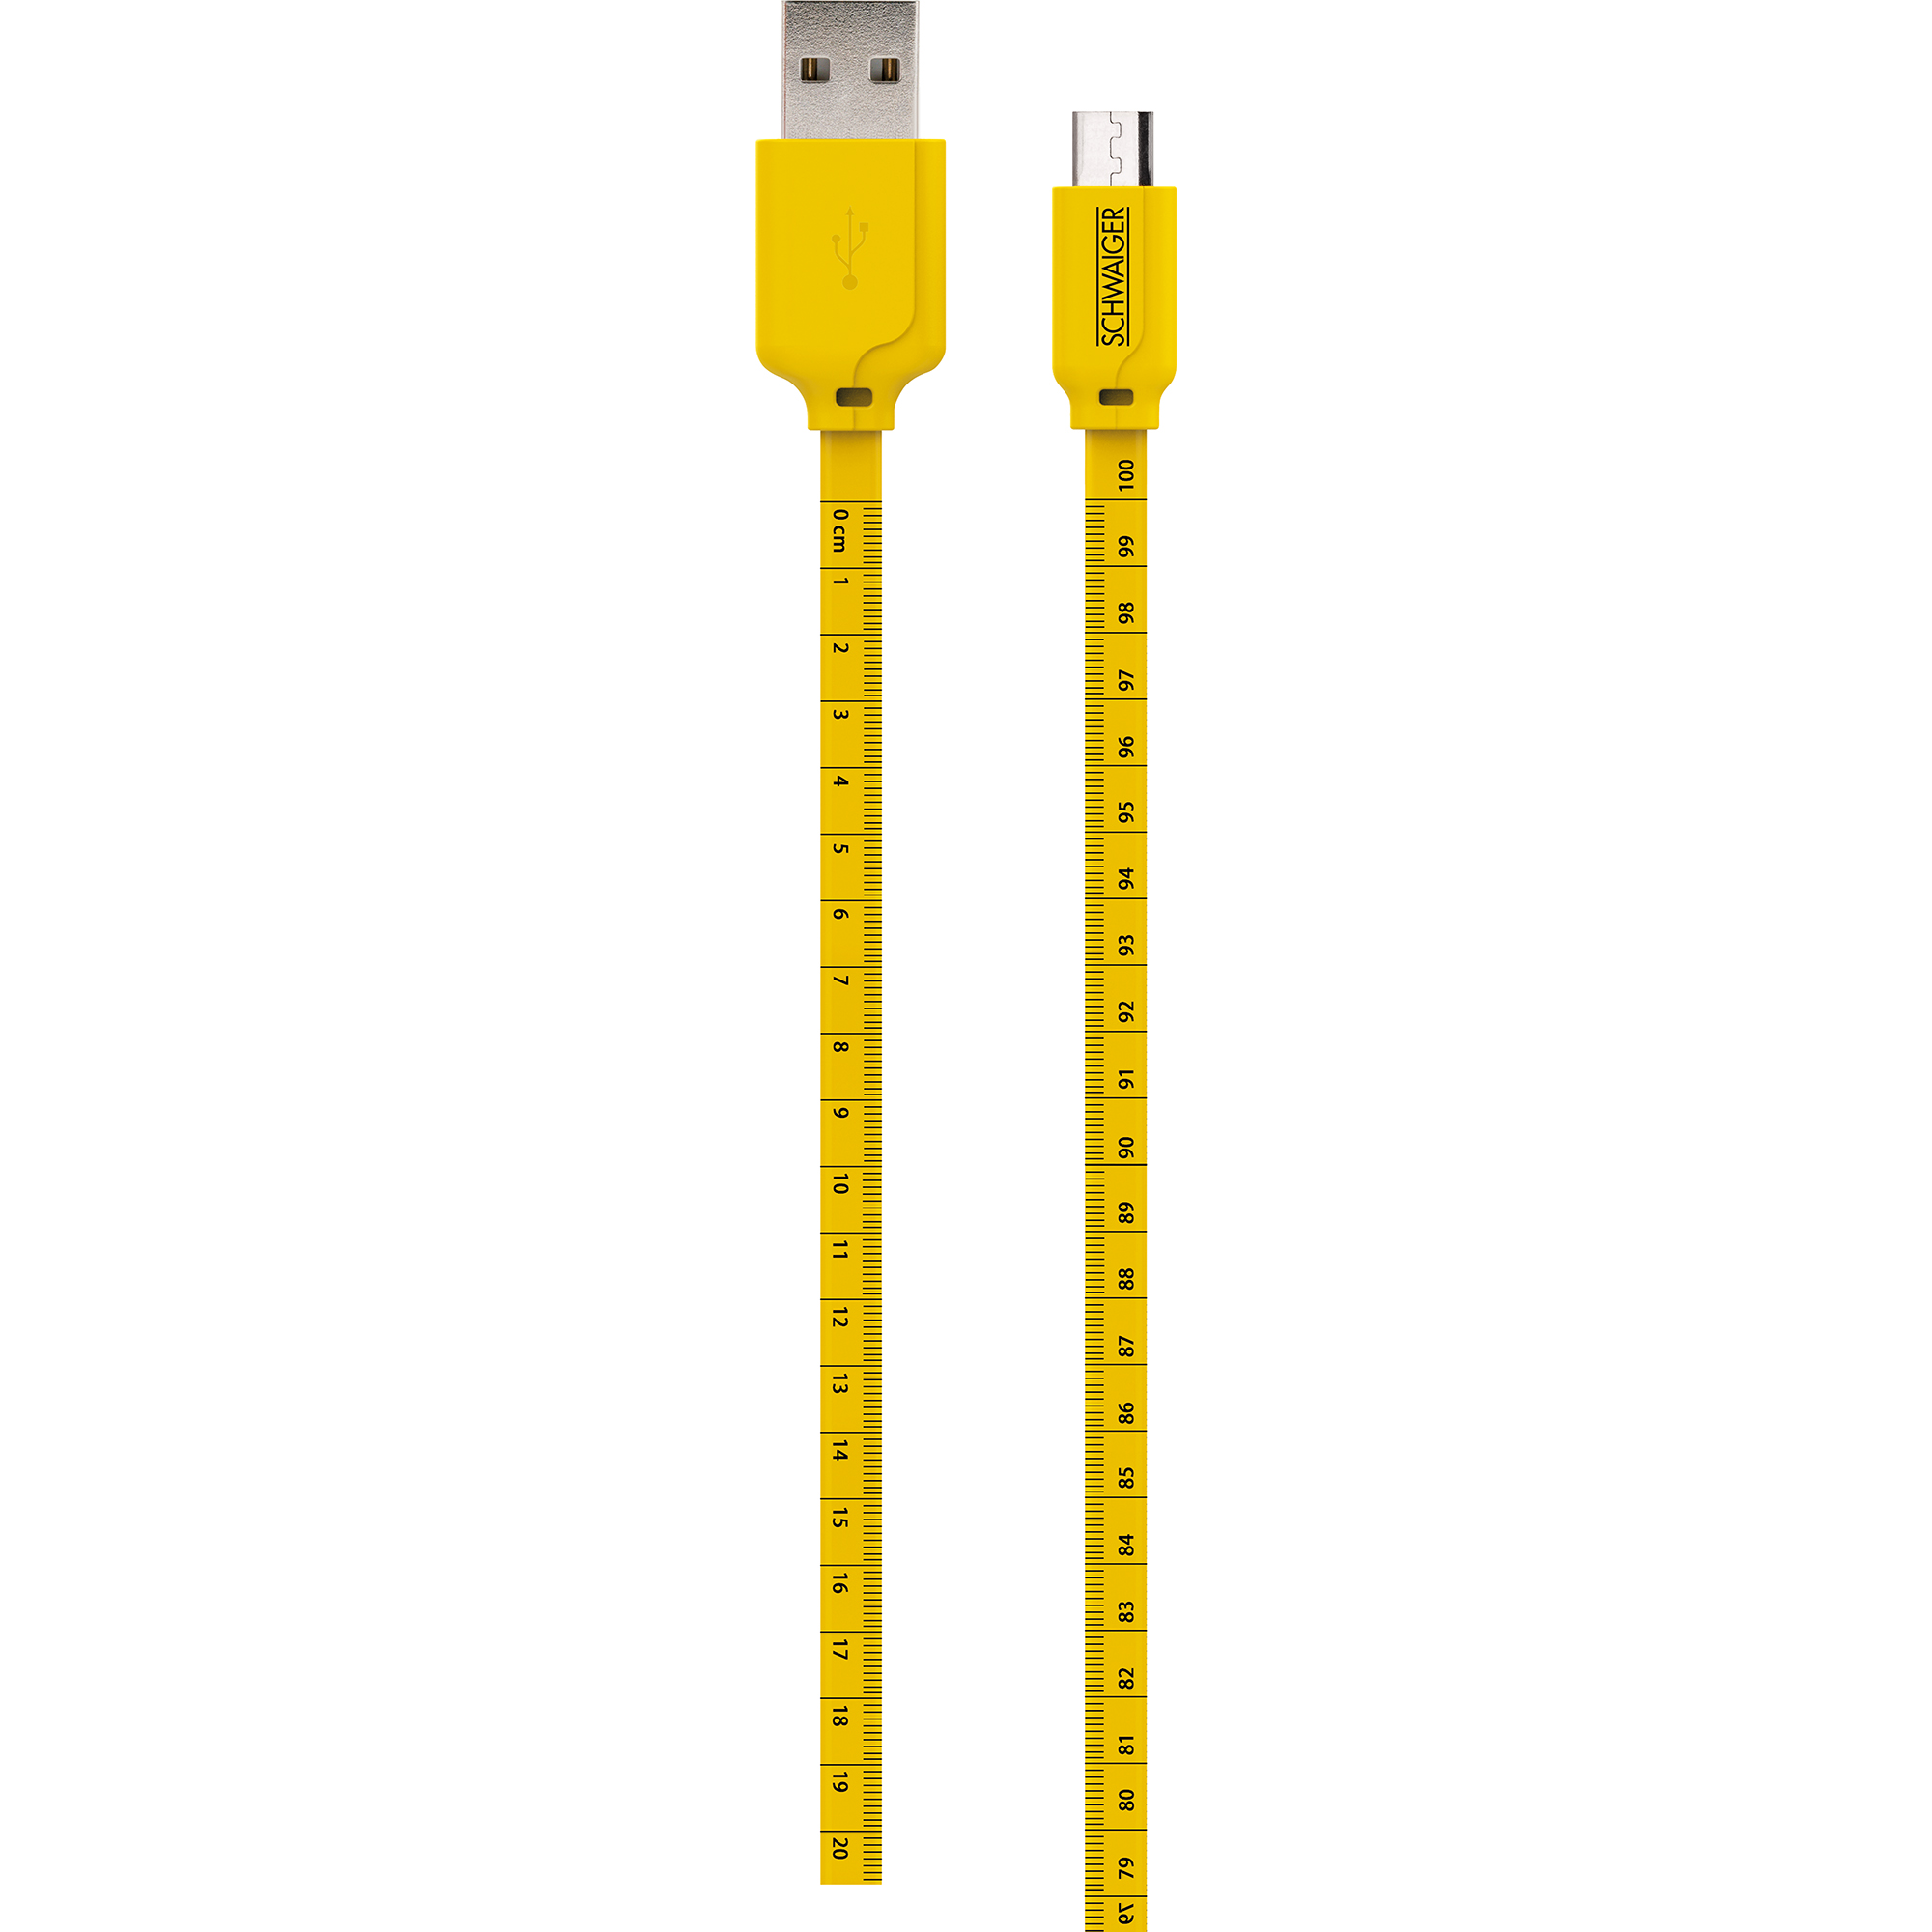 Micro USB Sync & Ladekabel mit Maßband 'WKM10 511' + product picture